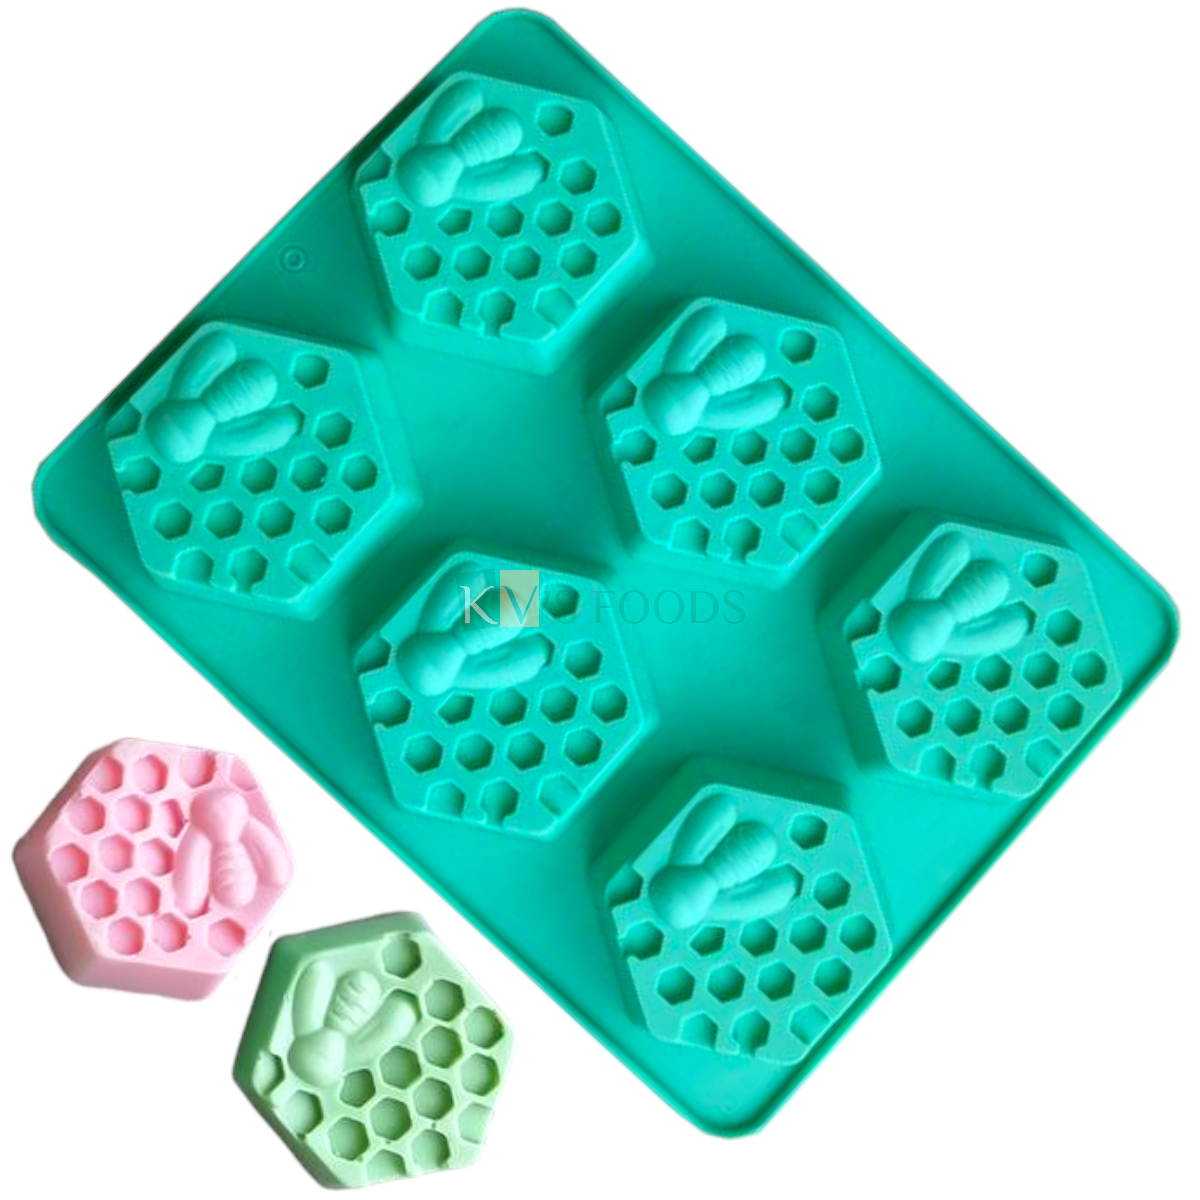 1 PC 6 Cavity Bee Honeycomb Hexagon Shape Silicon Mould Chocolate Mousse Dessert Bakeware Mini Bread Loaf, Brownie, Cornbread, Muffin, Kids Handmade Soap, Ice Cream, Candle Jelly Pudding Cake DIY Tool